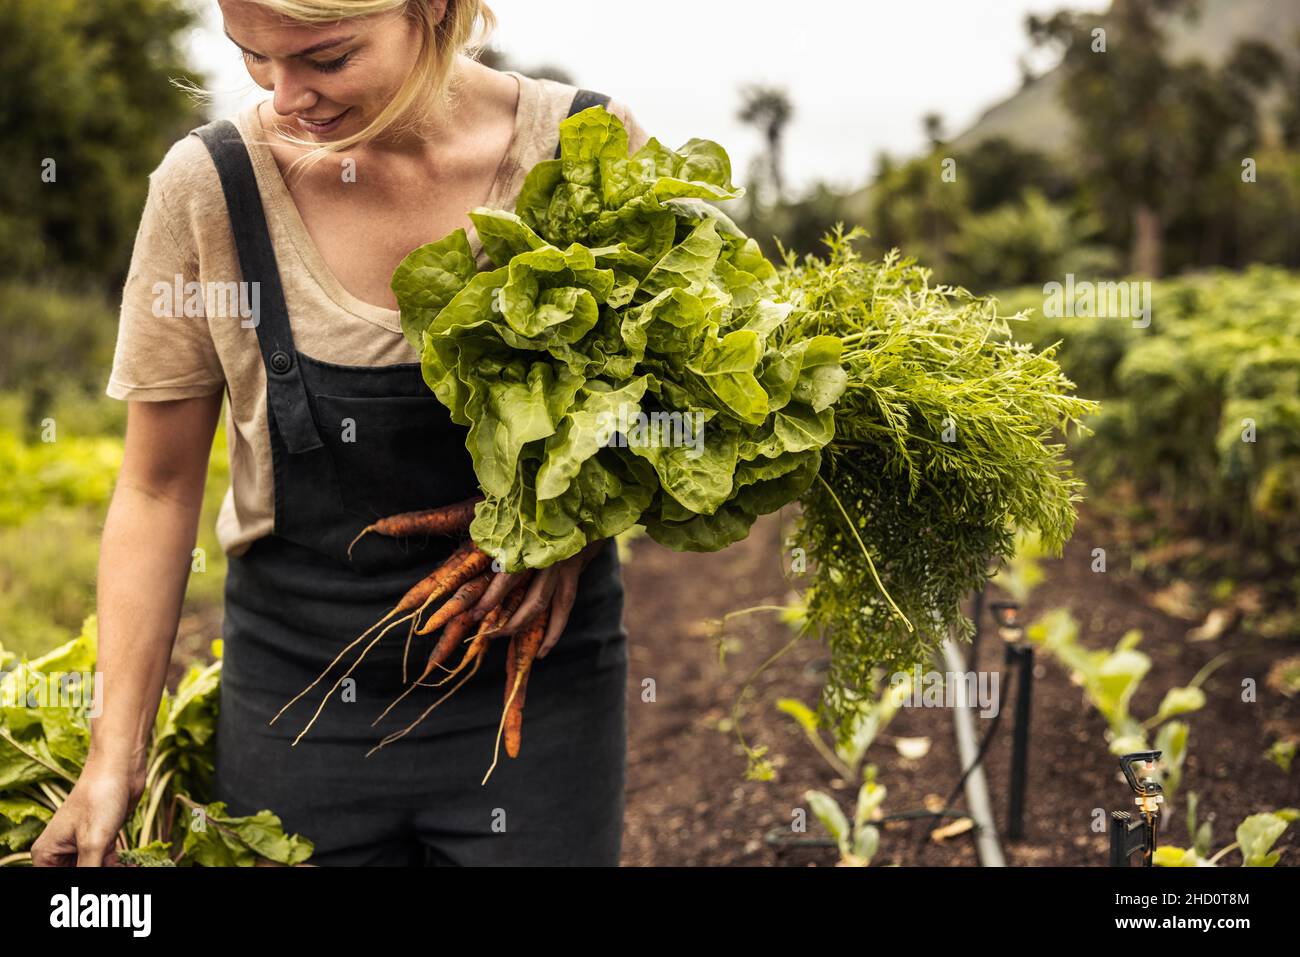 Smiling organic farmer holding freshly picked vegetables in an agricultural field. Self-sustainable young woman gathering fresh green produce in her g Stock Photo